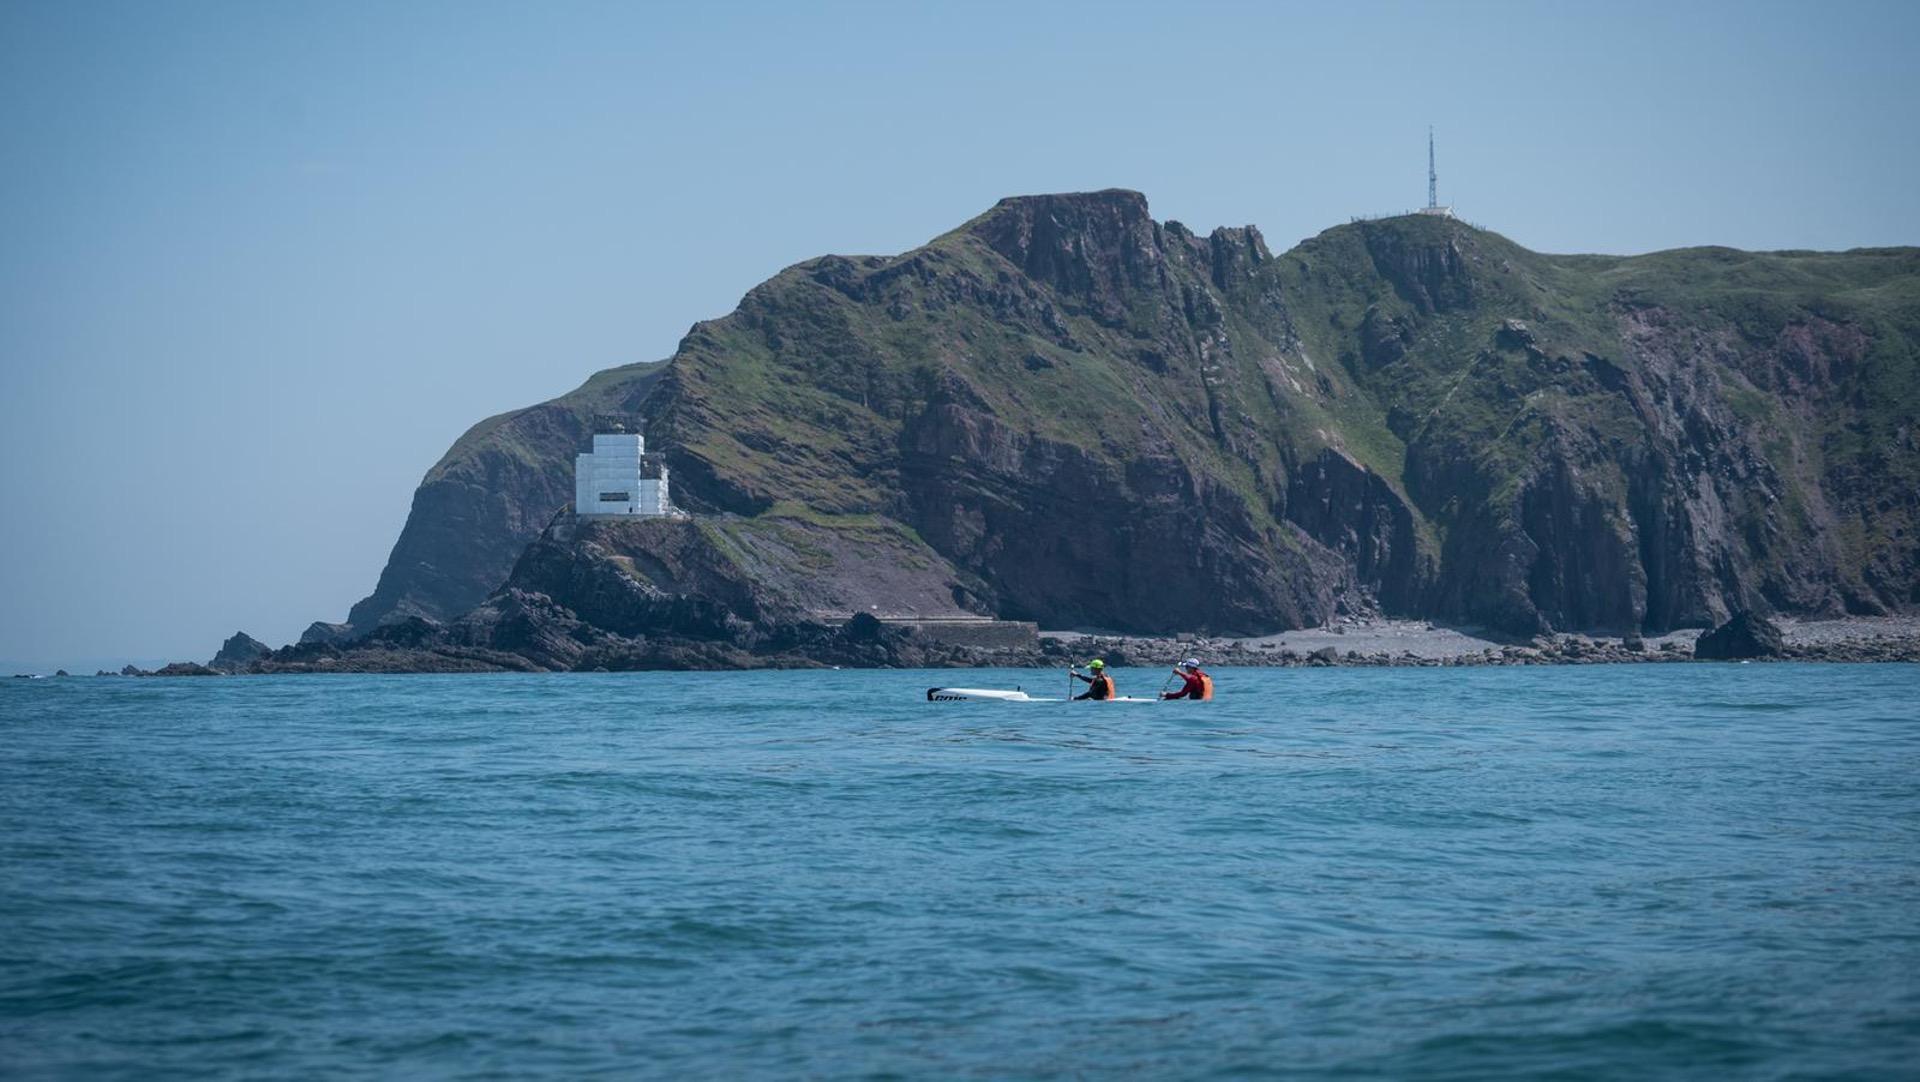 Kayaking from Land's End to John o' Groats was Edward's first long-distance endurance challenge. Photo: Courtesy of Darren Edwards